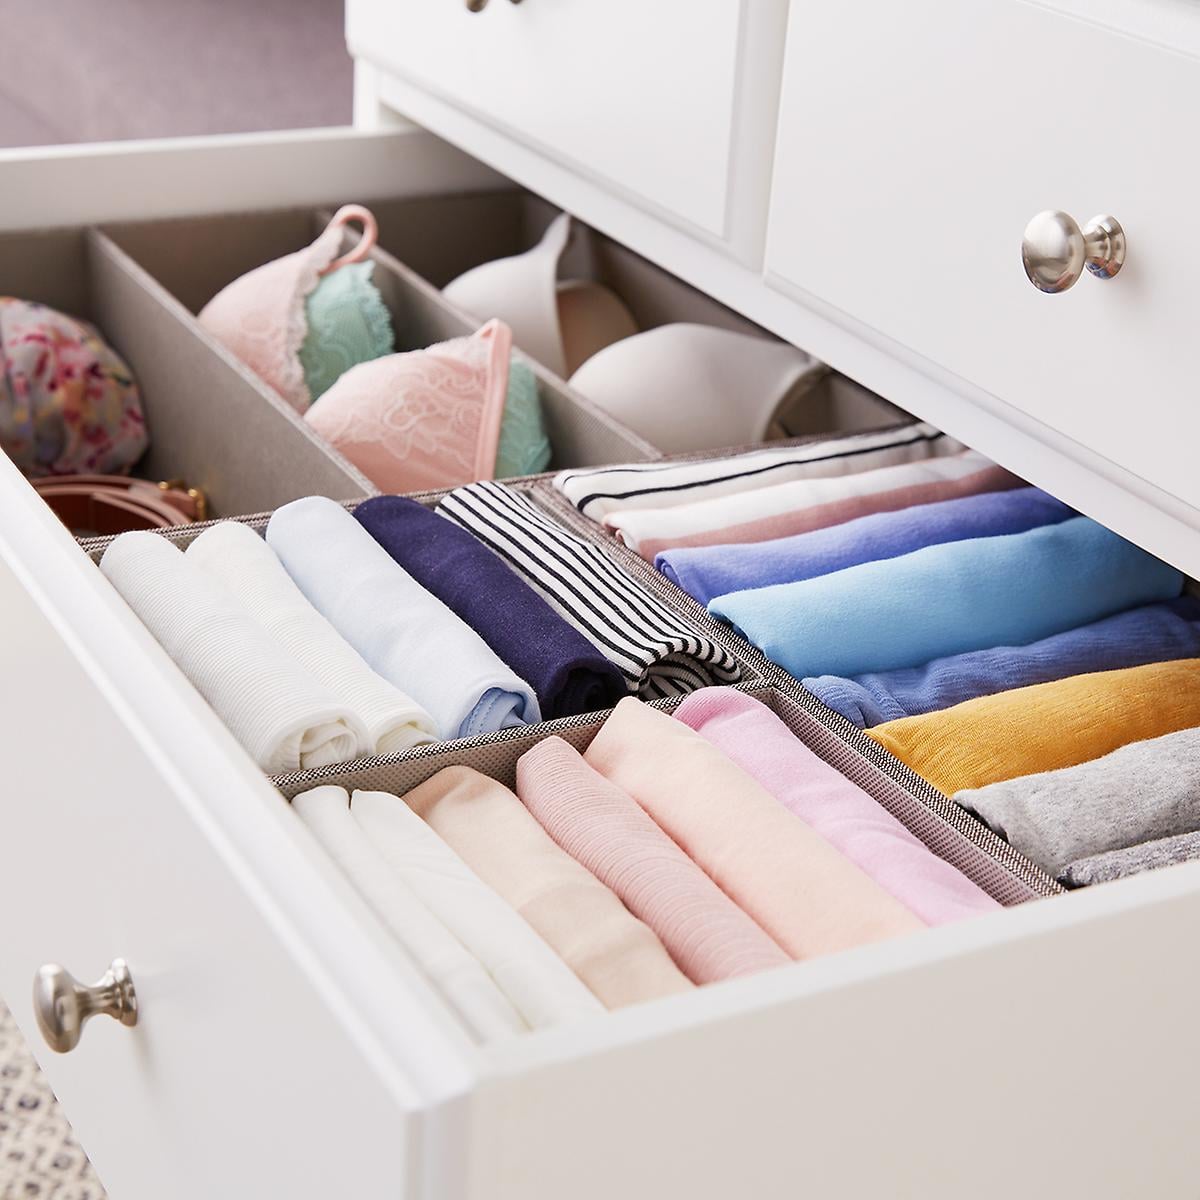 The 18 best closet organizers, plus tidying tips from Marie Kondo